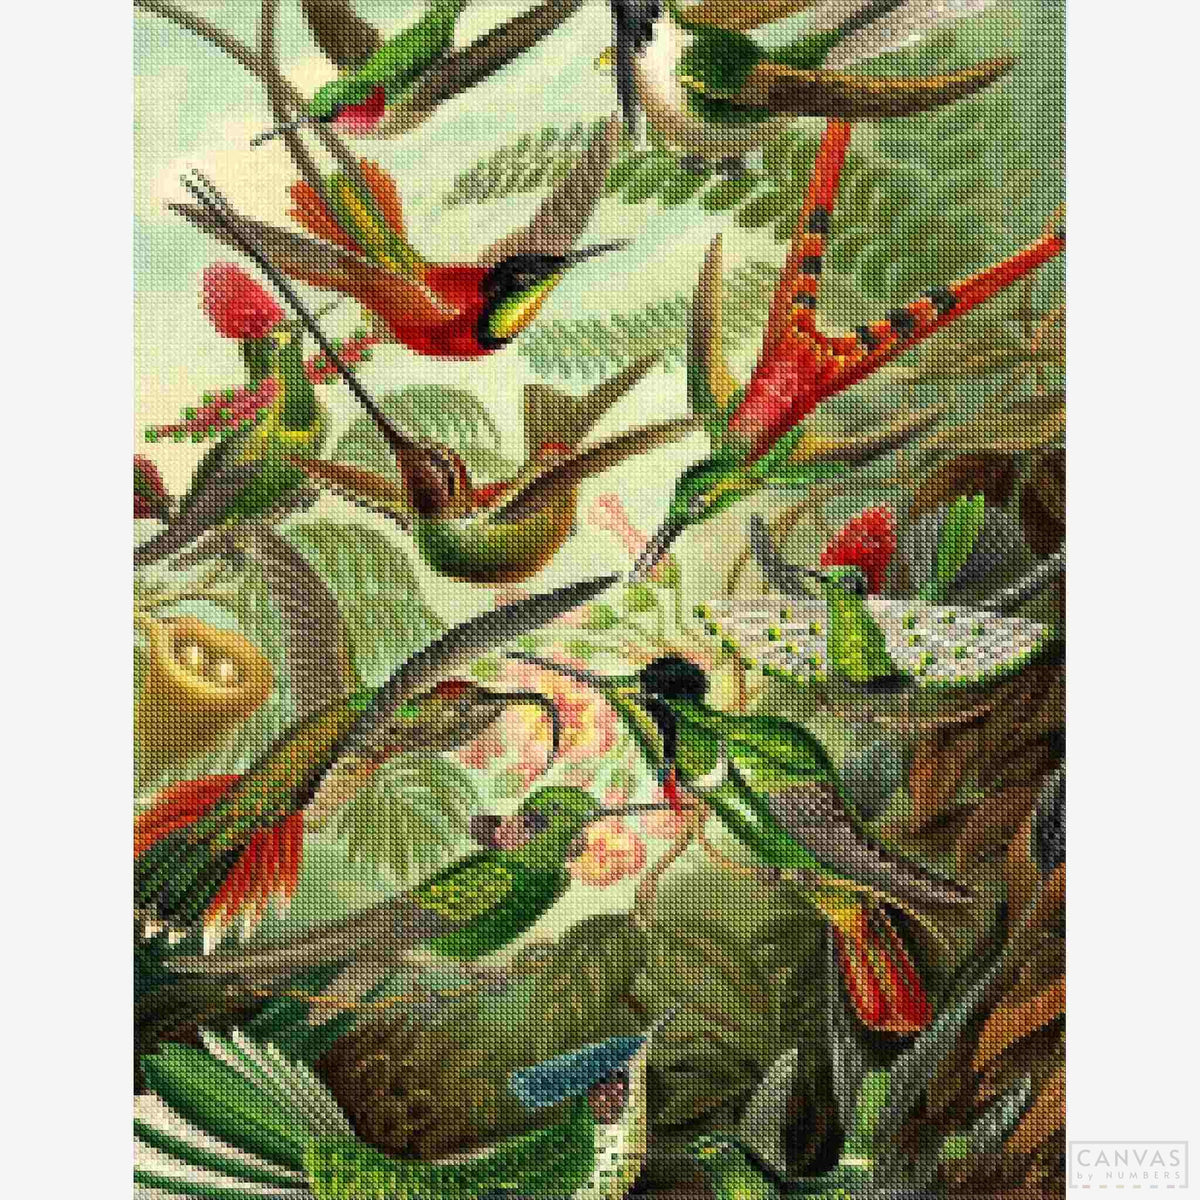 Trochilidae (Hummingbirds) - Diamond Painting-Craft a shimmering tribute to biology and art with Haeckel's "Hummingbirds" diamond painting kit. Dive into nature's delicate details.-Canvas by Numbers